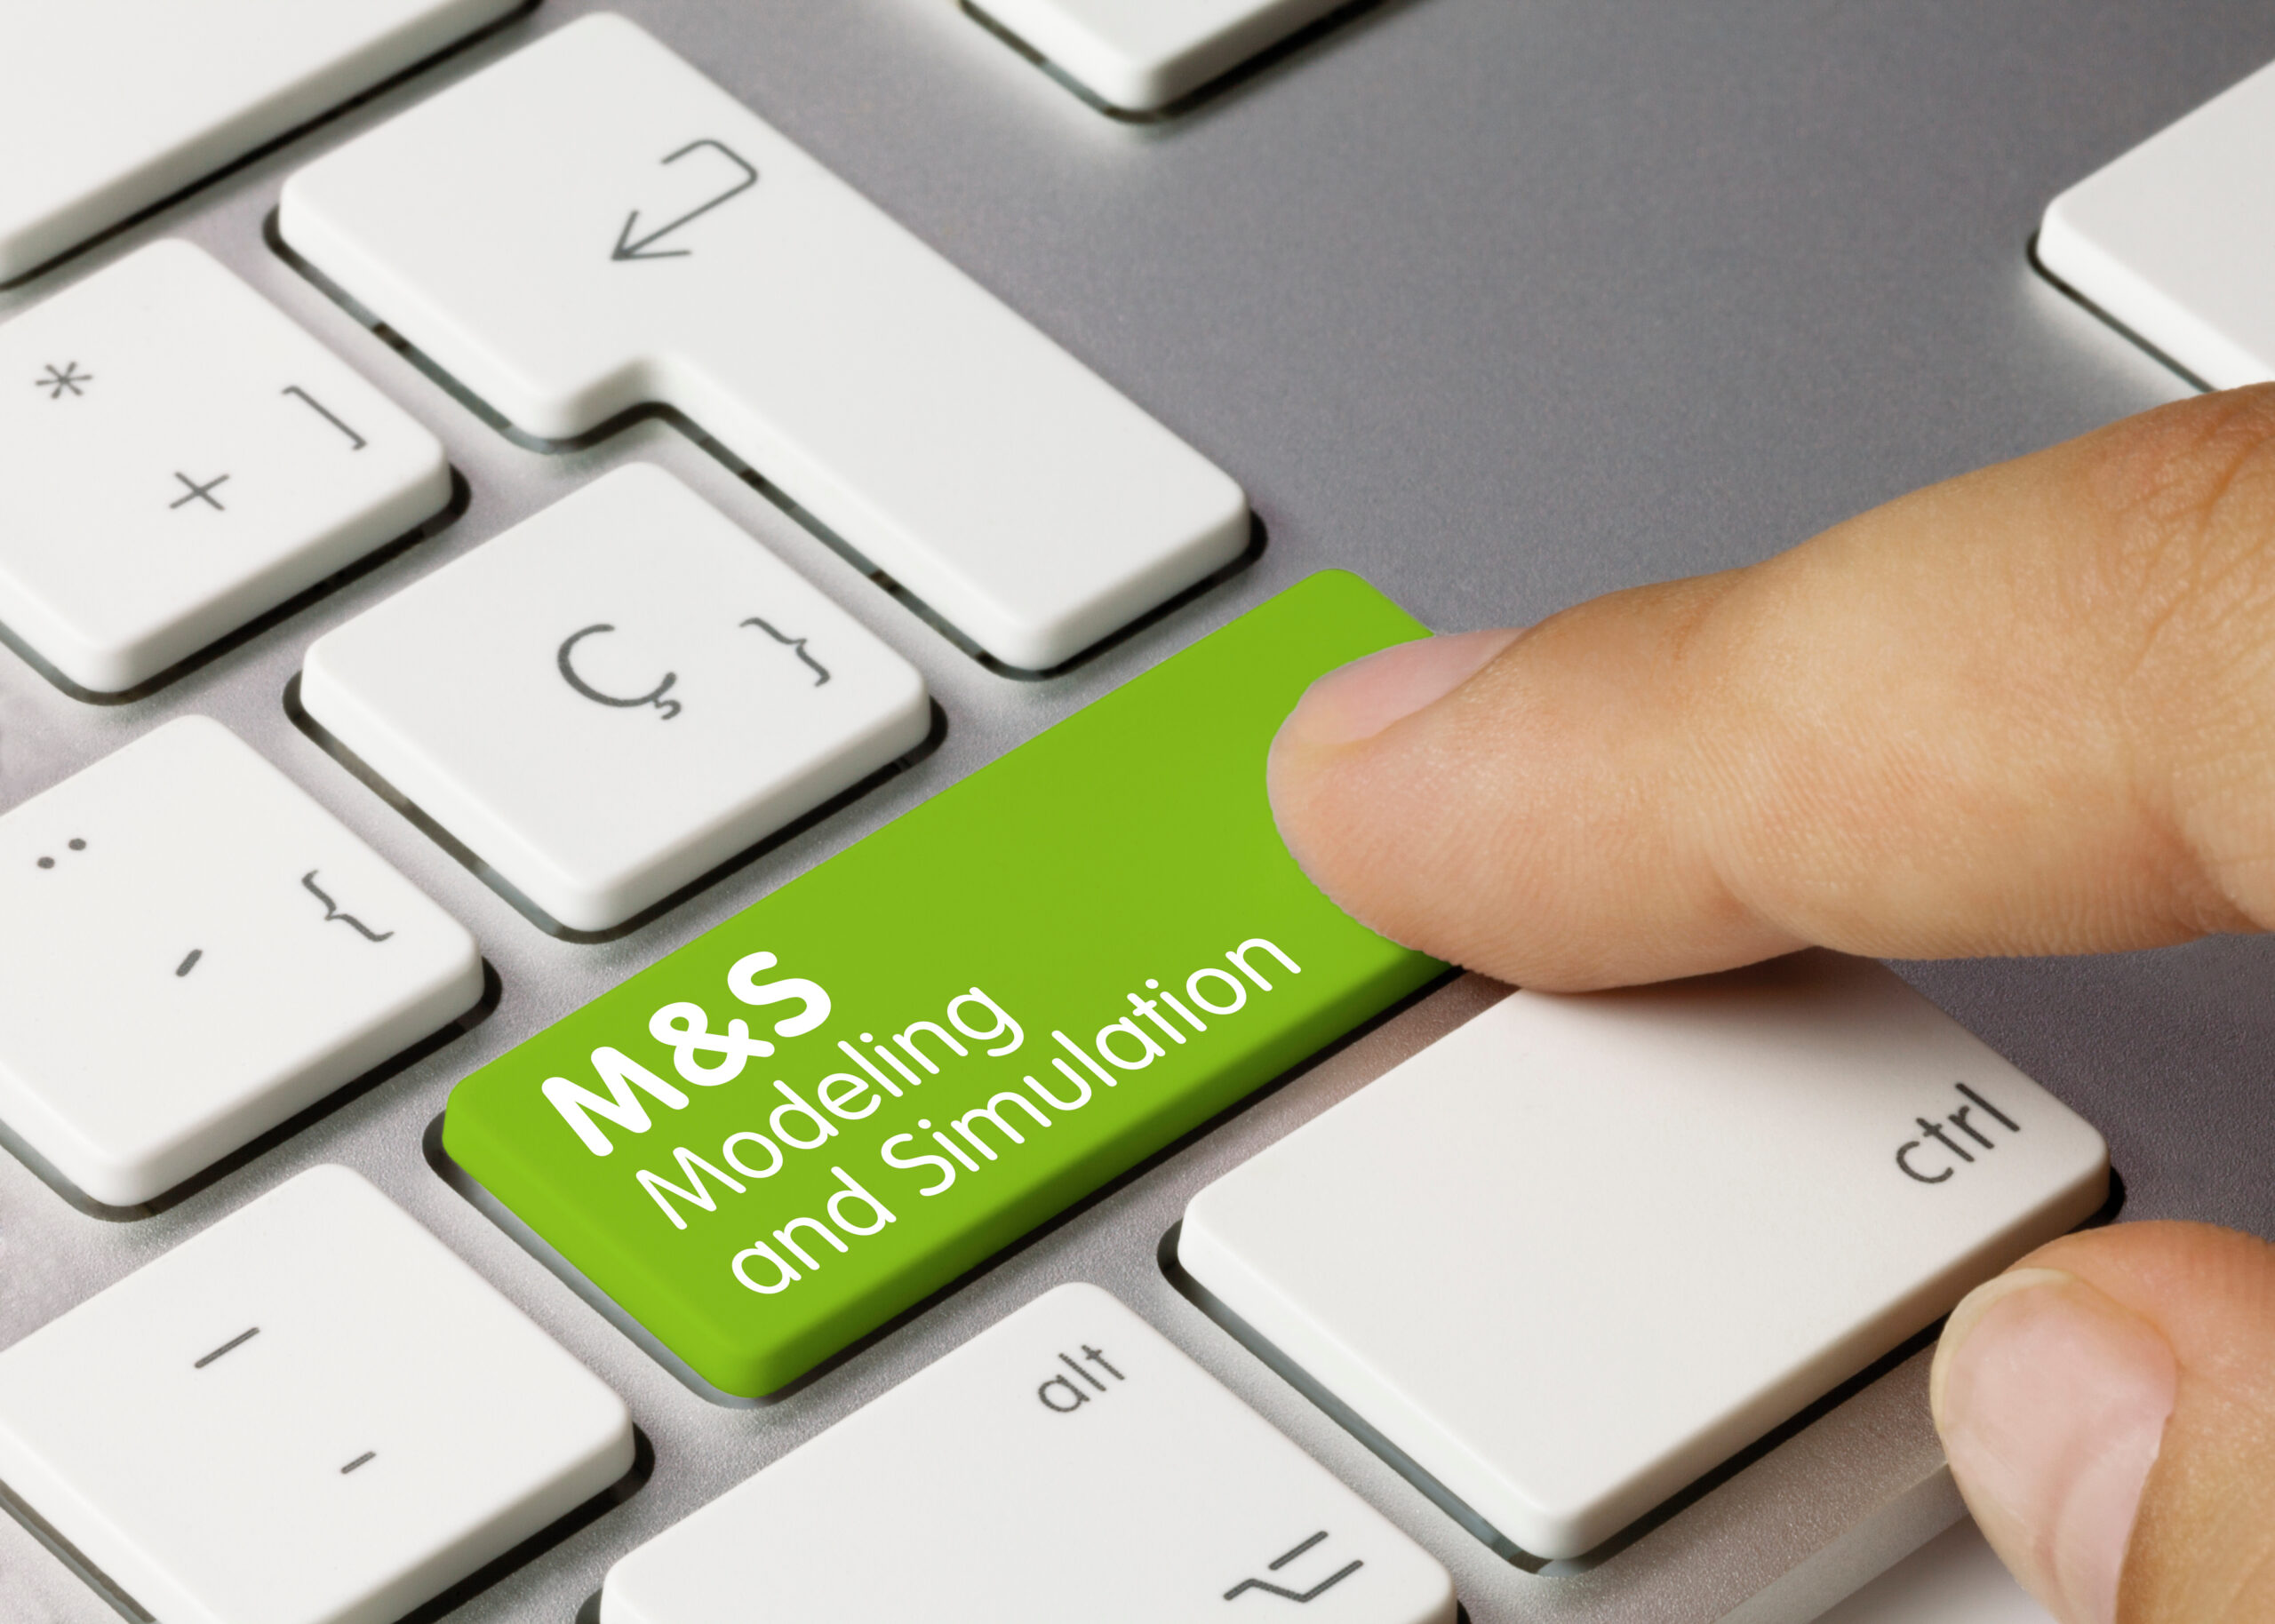 M&S modeling and simulation – Inscription on Green Keyboard Key.